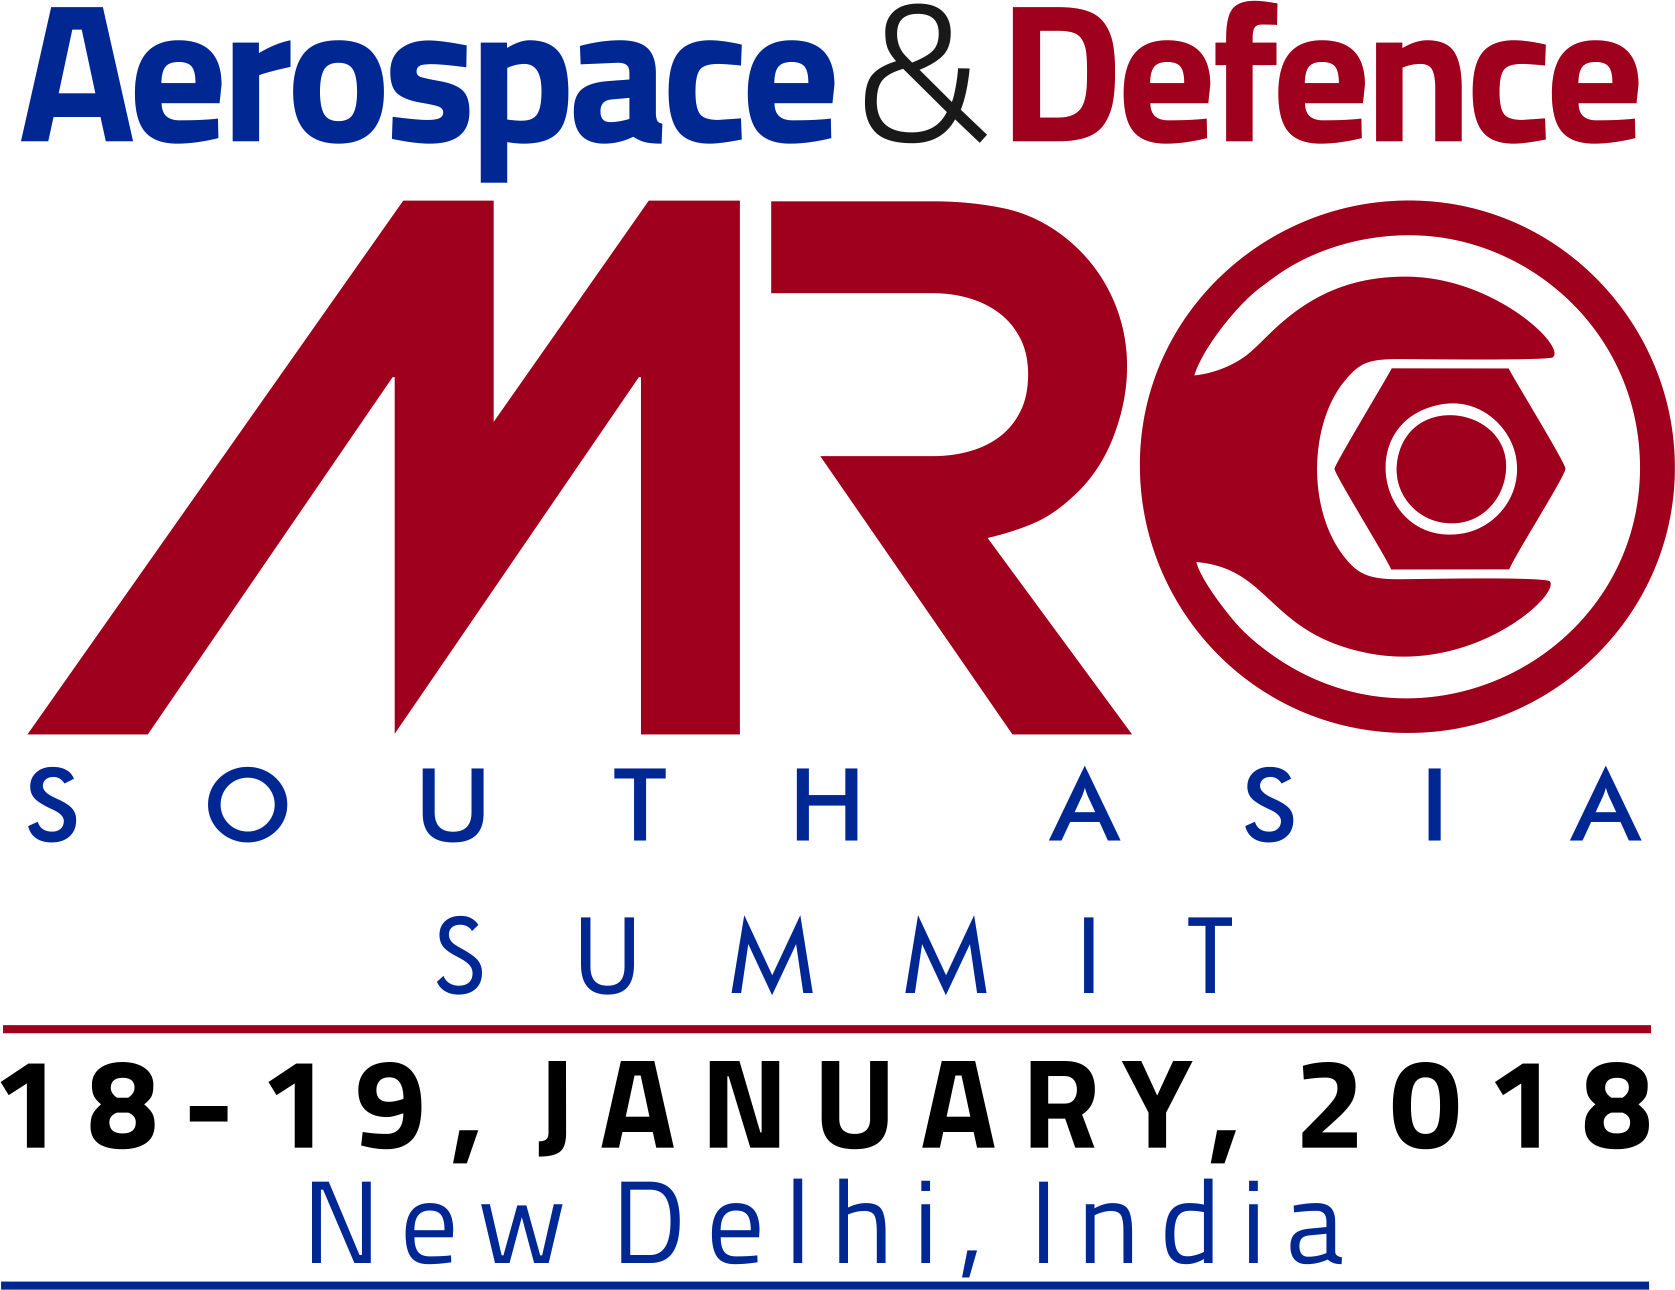 Aviation Media Companies Support Aerospace & Defence MRO South Asia Summit